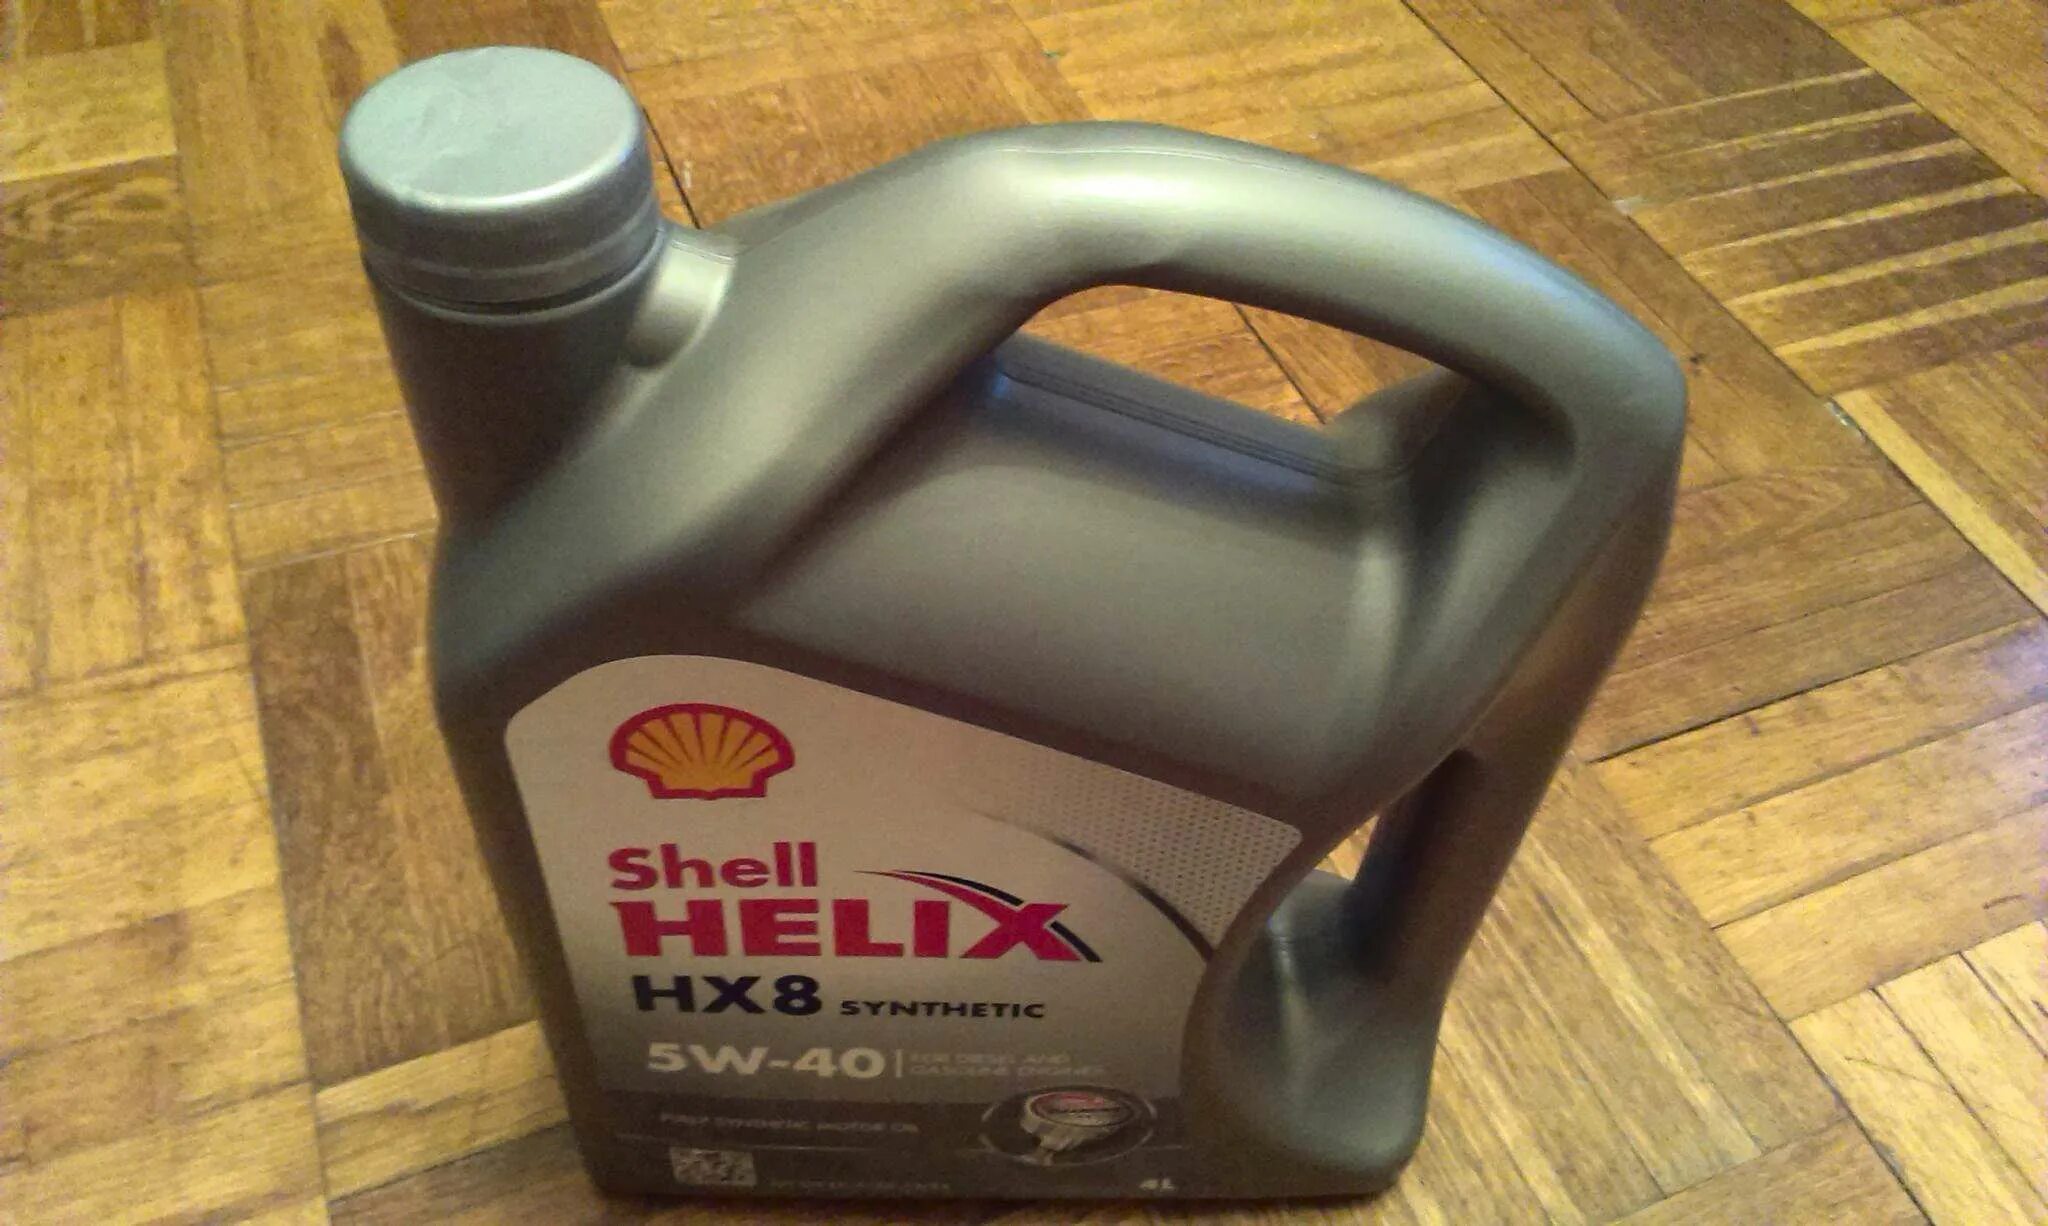 Shell hx8 Synthetic 5w40. Shell Helix hx8 Synthetic 5w-40. Helix hx8 Synthetic 5w-40. Shell Helix hx8 Synthetic 5w-40, 4 л. Моторное масло hx8 5w40